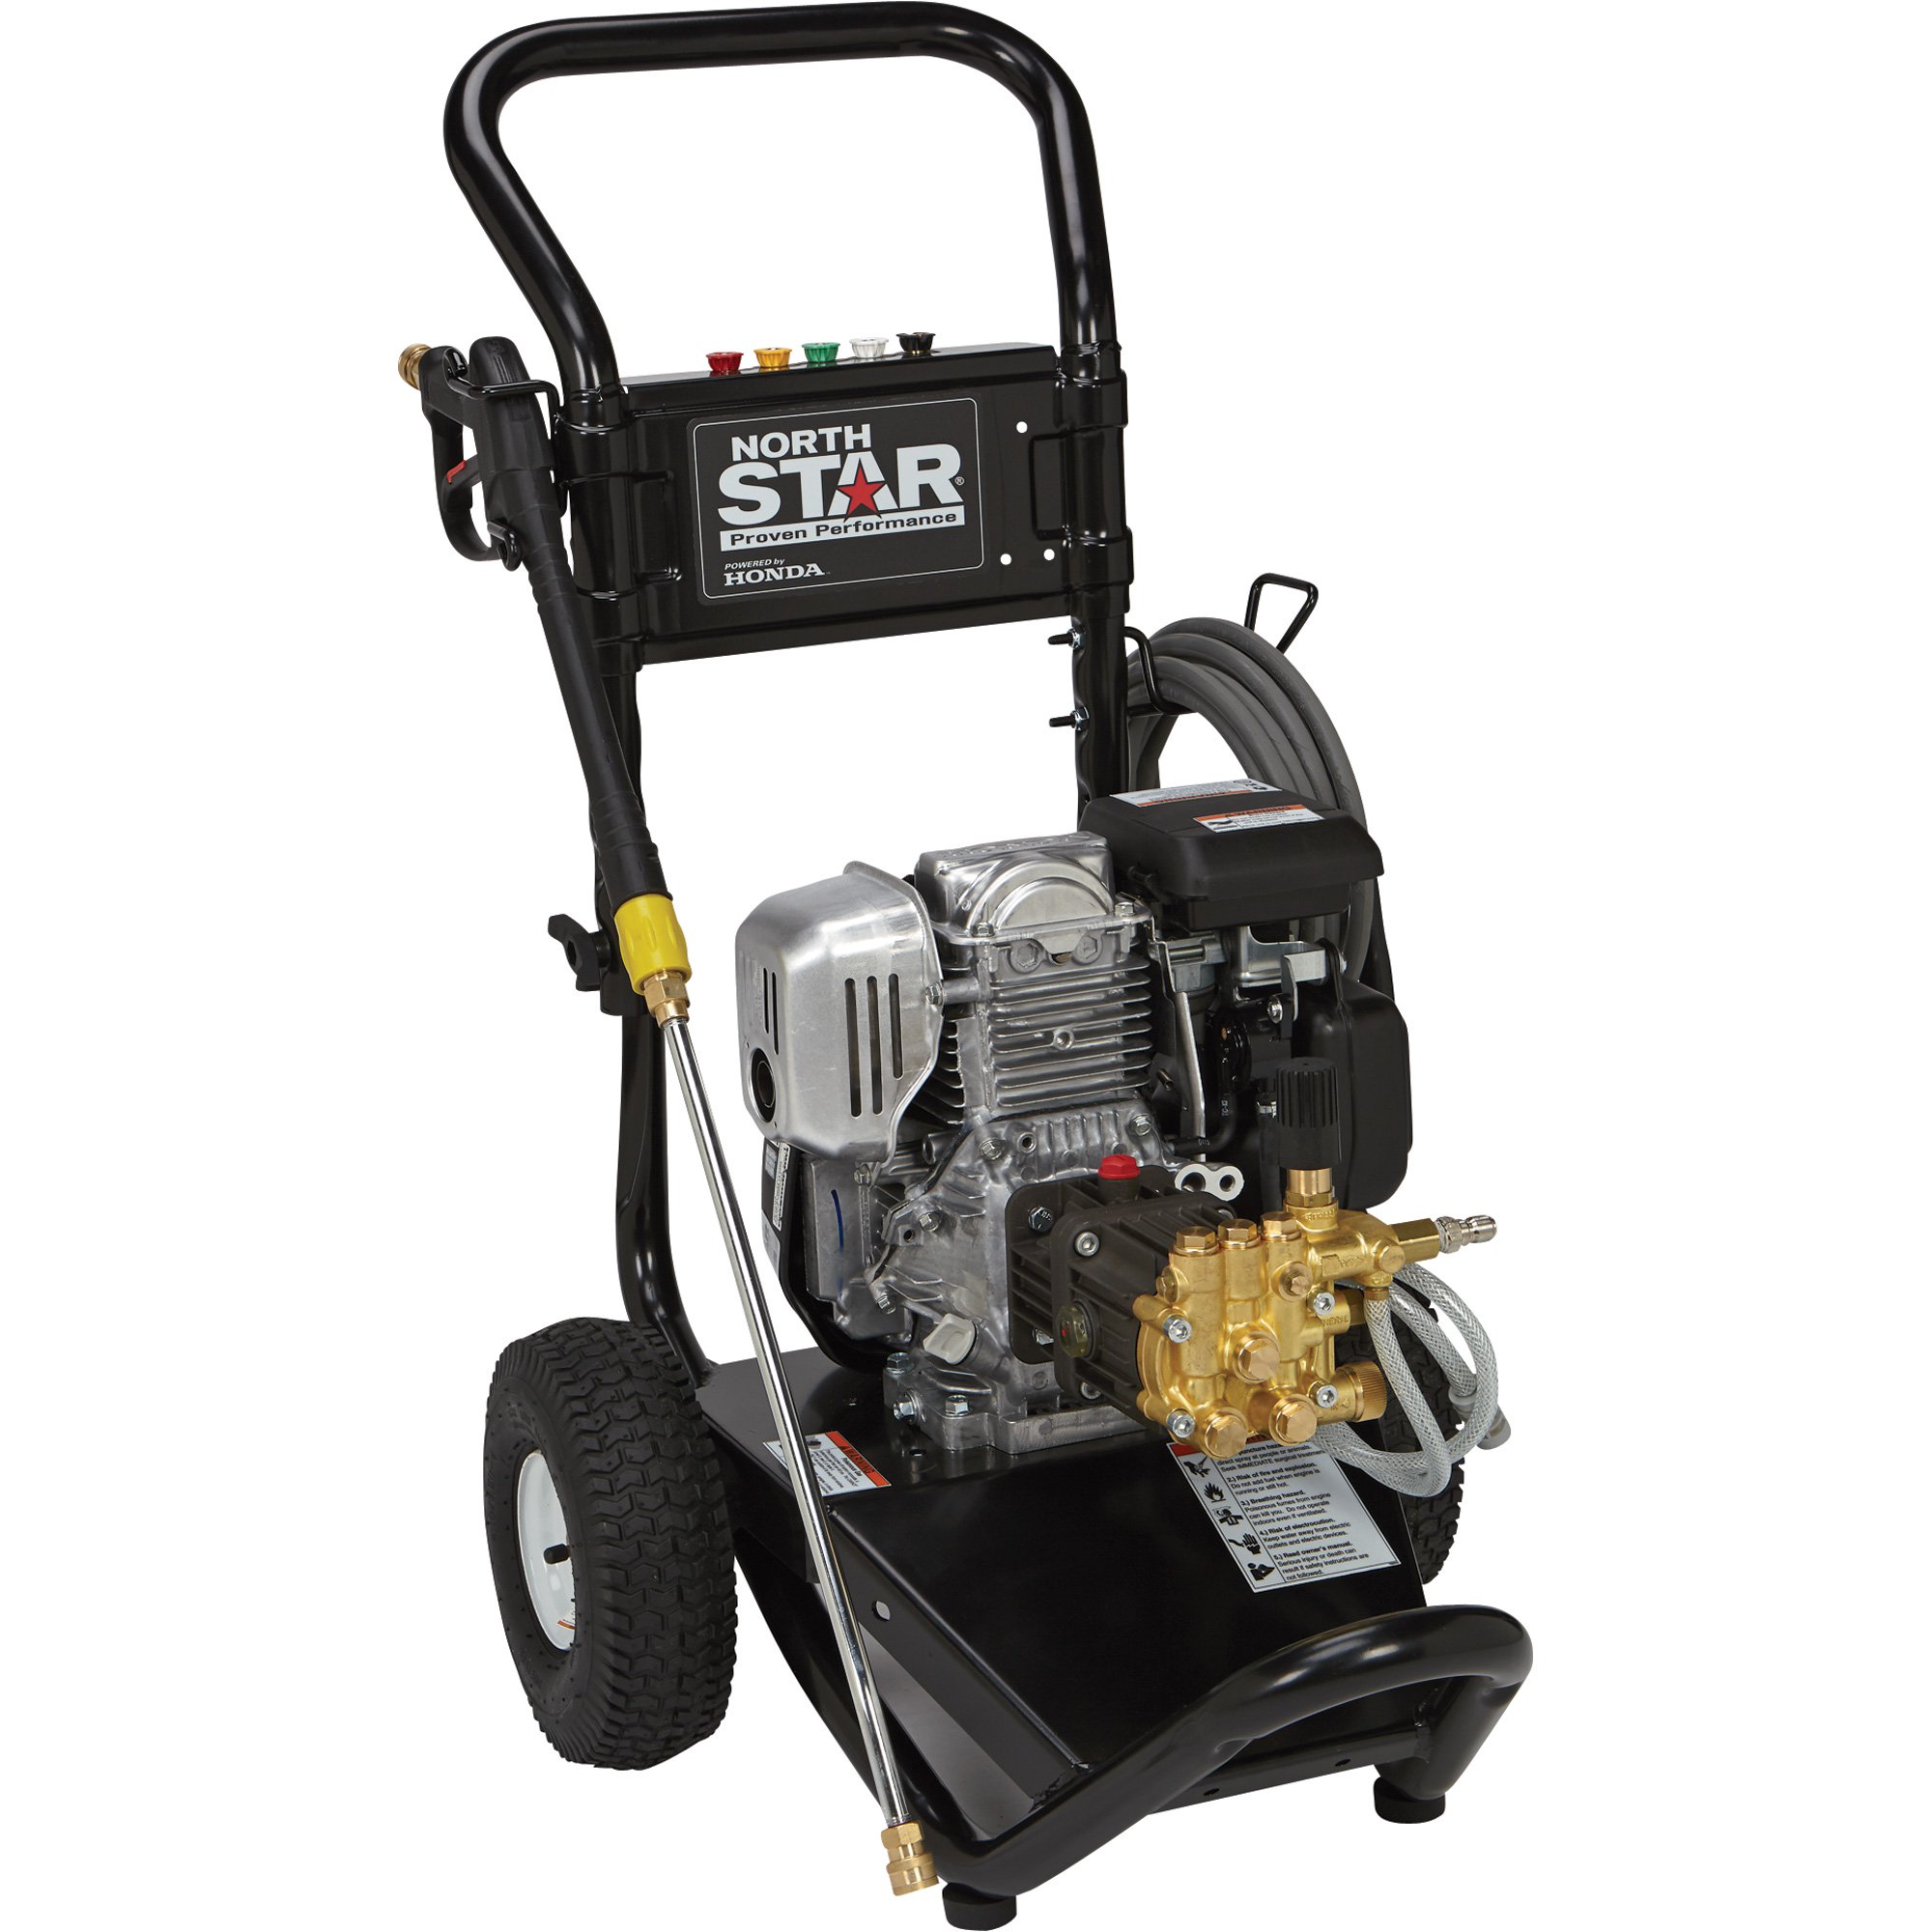 NorthStar 15775440 Gas Cold Water Pressure Washer 3000 PSI 2.5 GPM Honda Engine Replaced with 157121 Freight Included